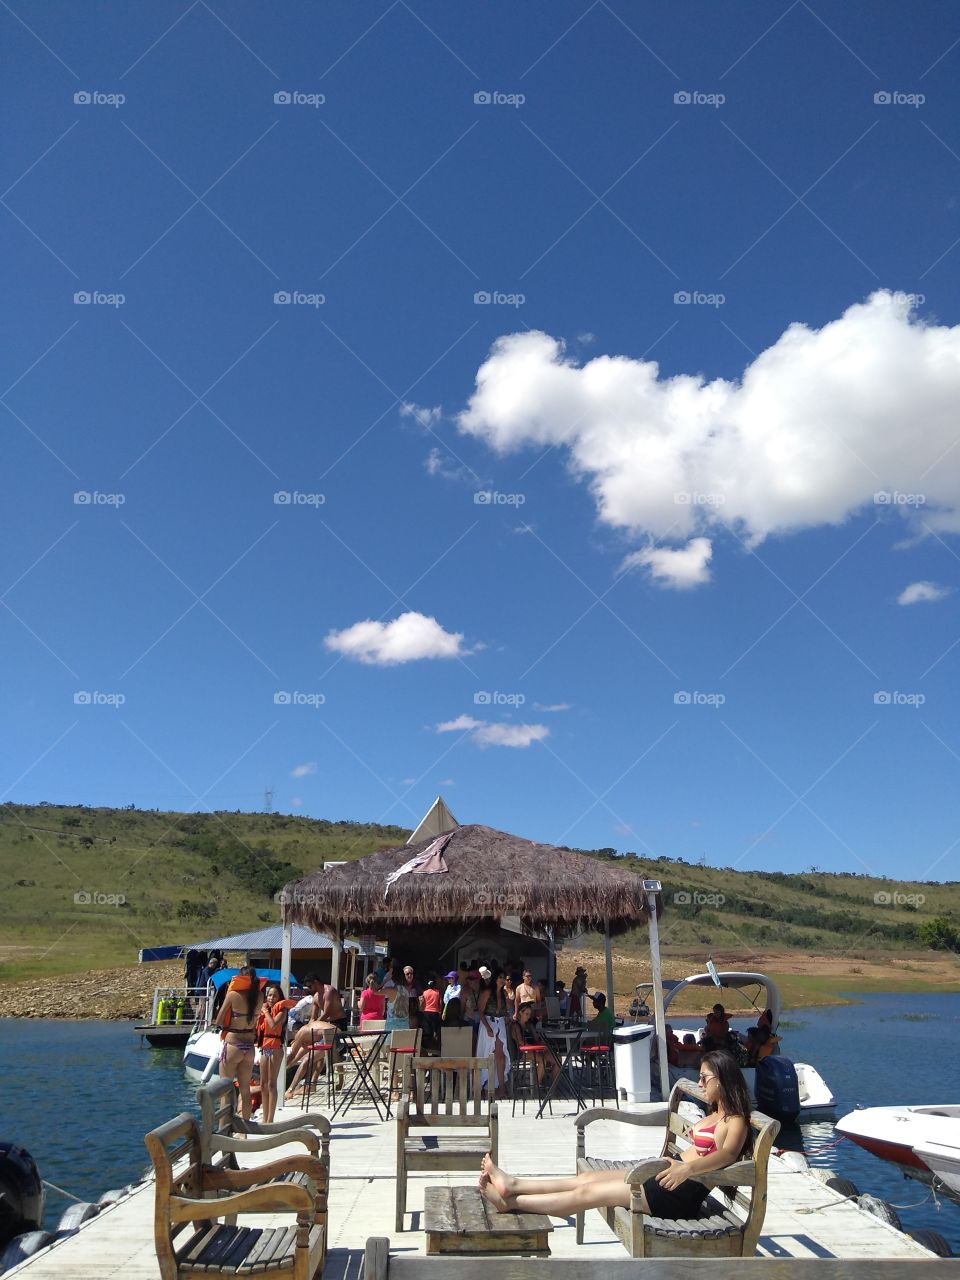 Floating restaurant in the middle of Capitólio's water in Brazil